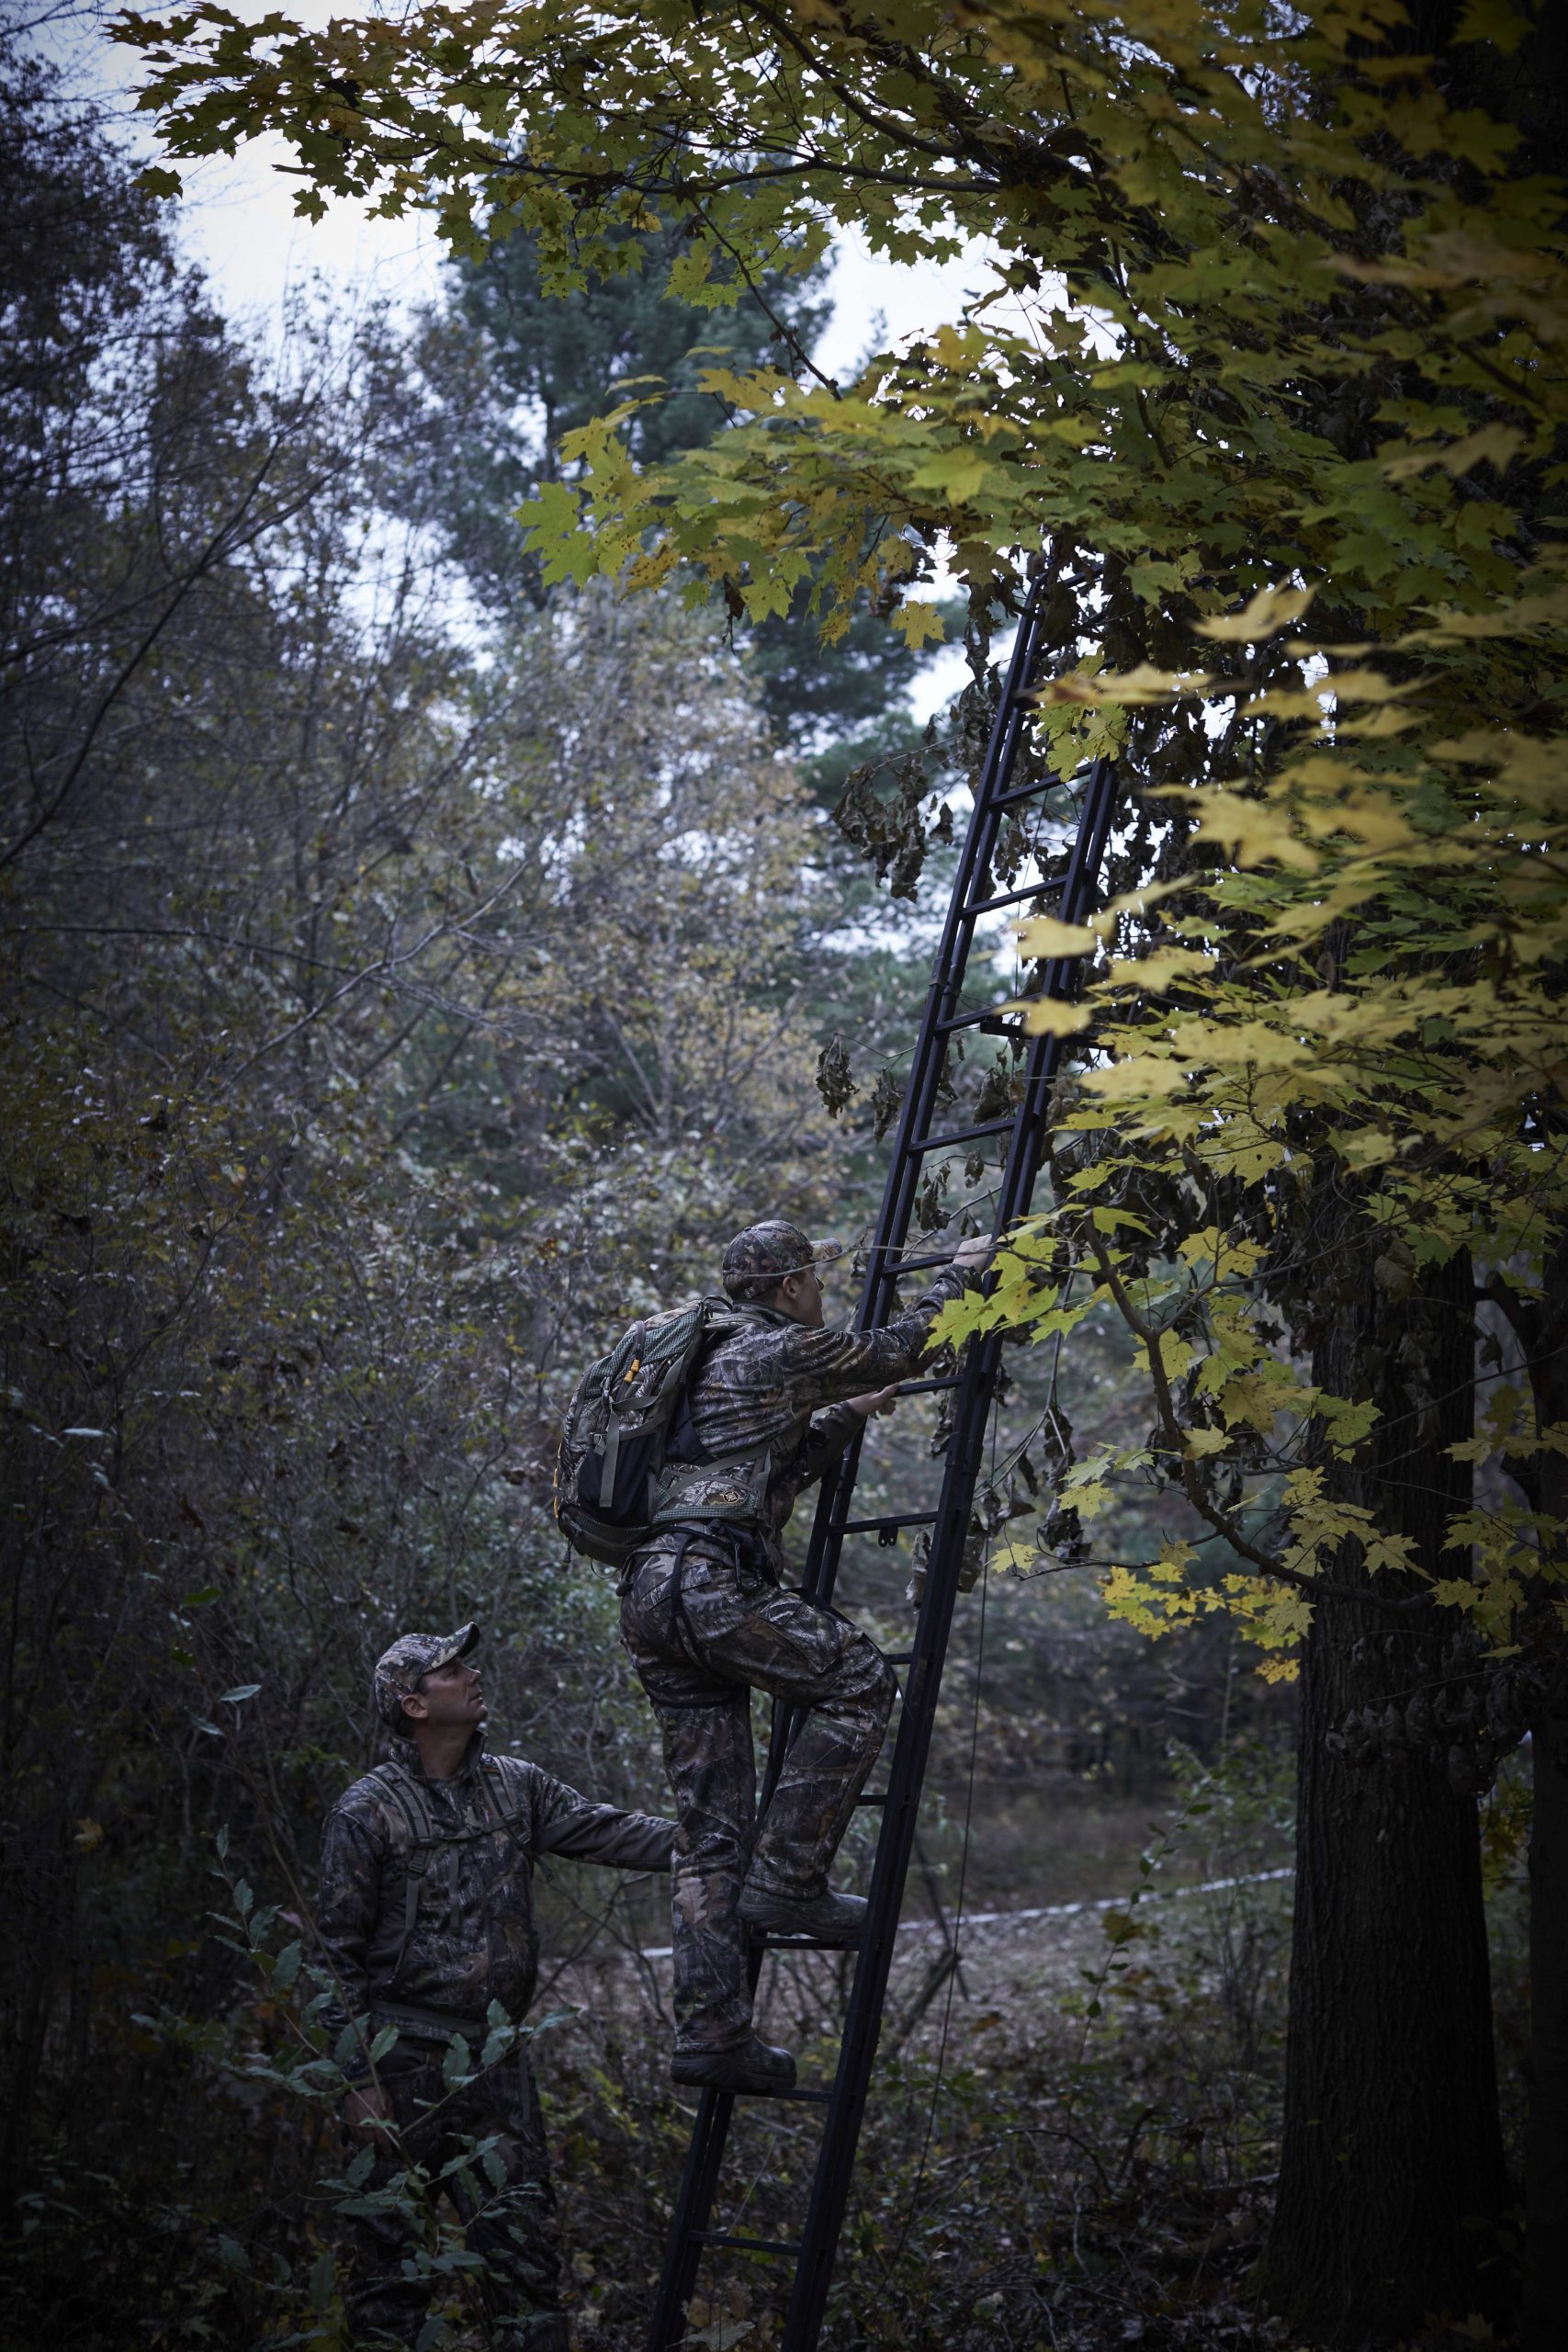 Nicholas heads up his ladder stand with his hunting backpack.